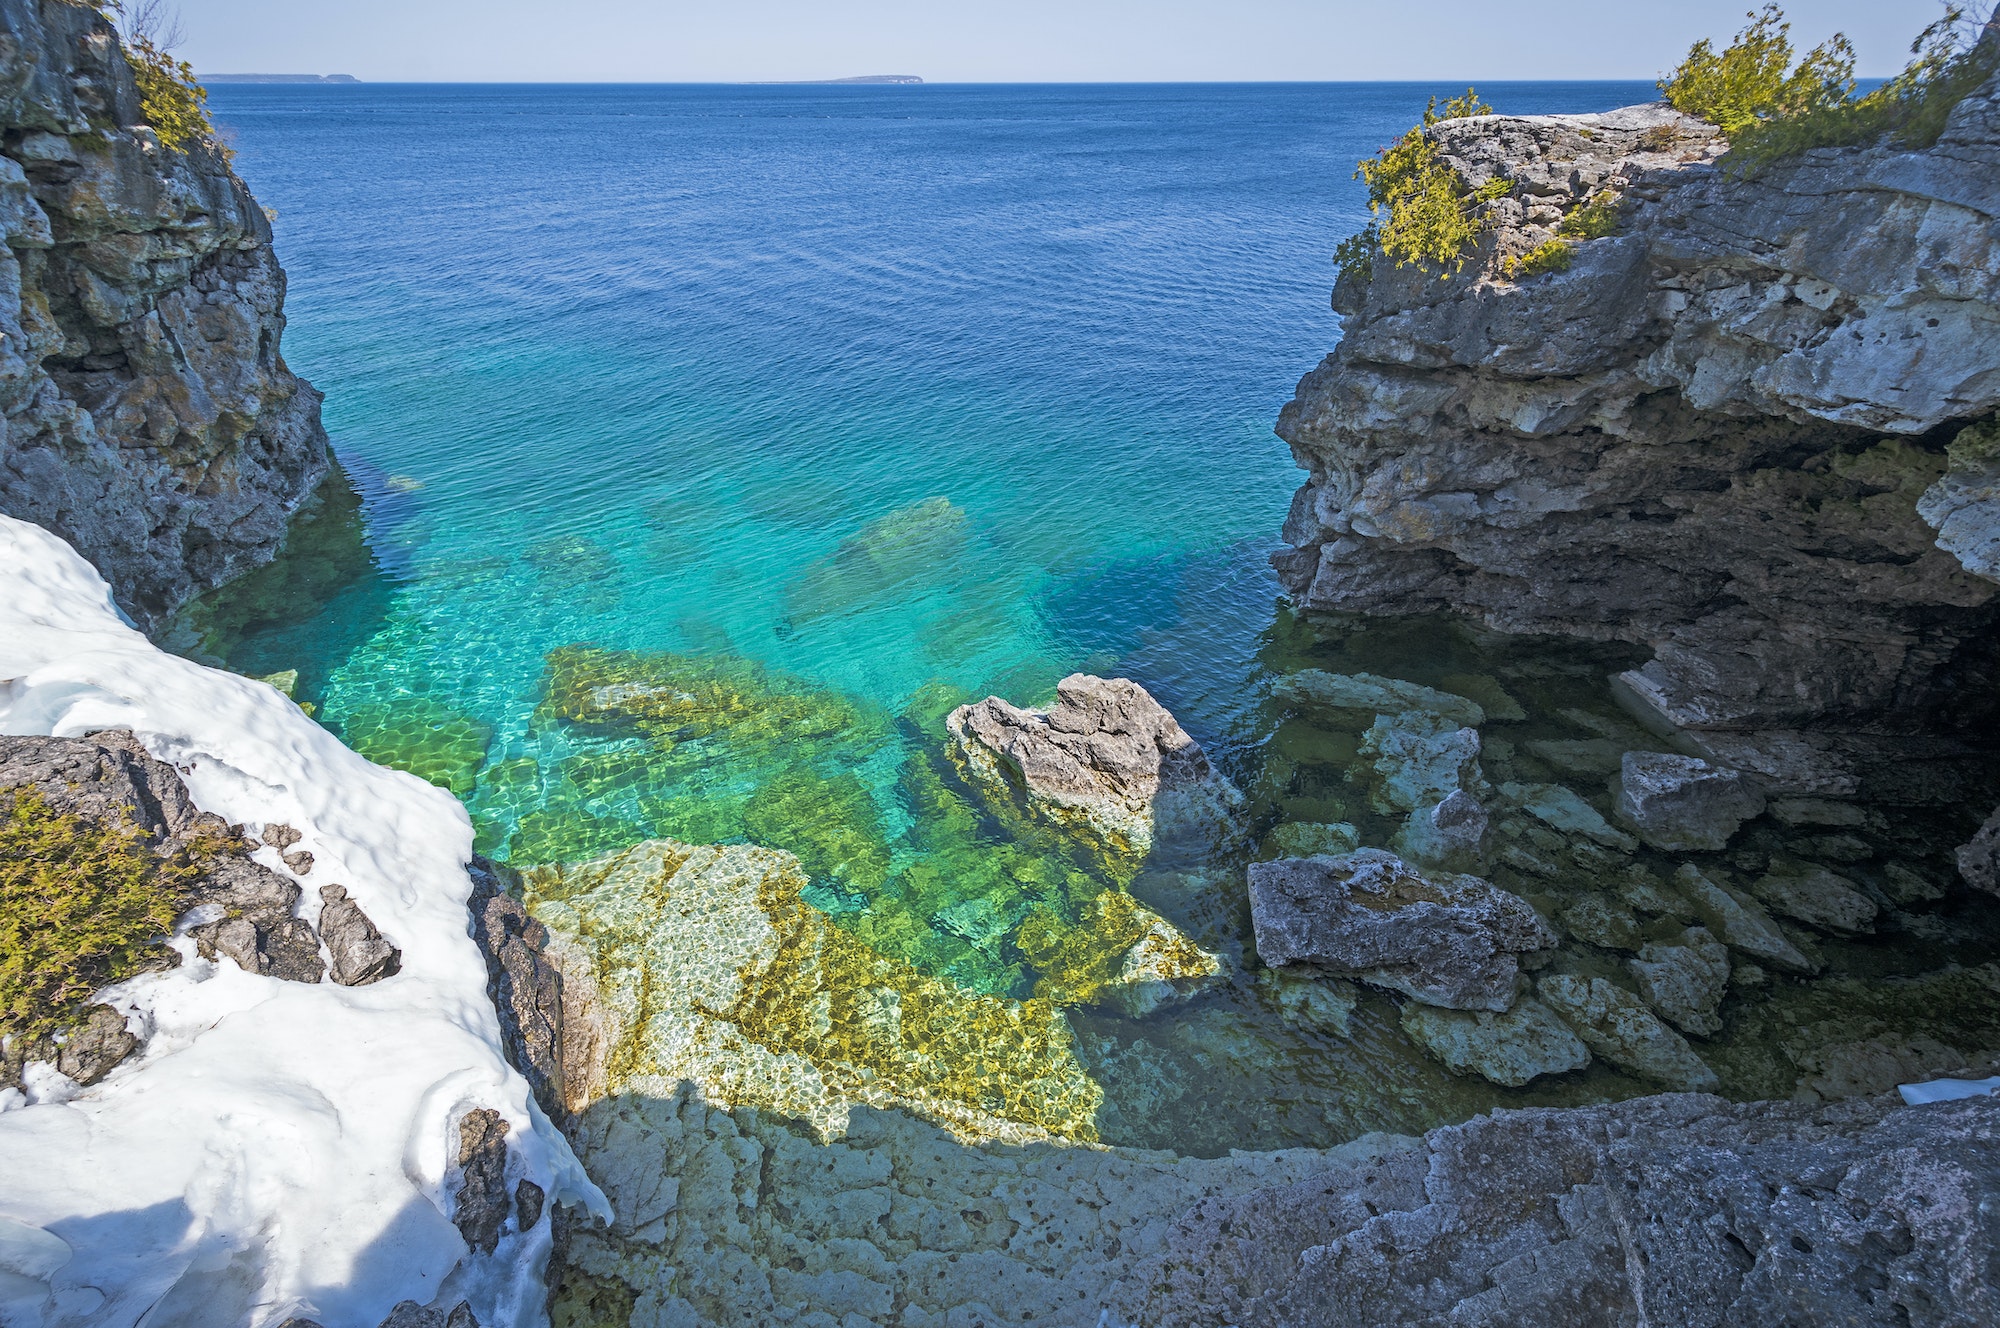 Dramatic Grotto on the Shores of the Great Lakes